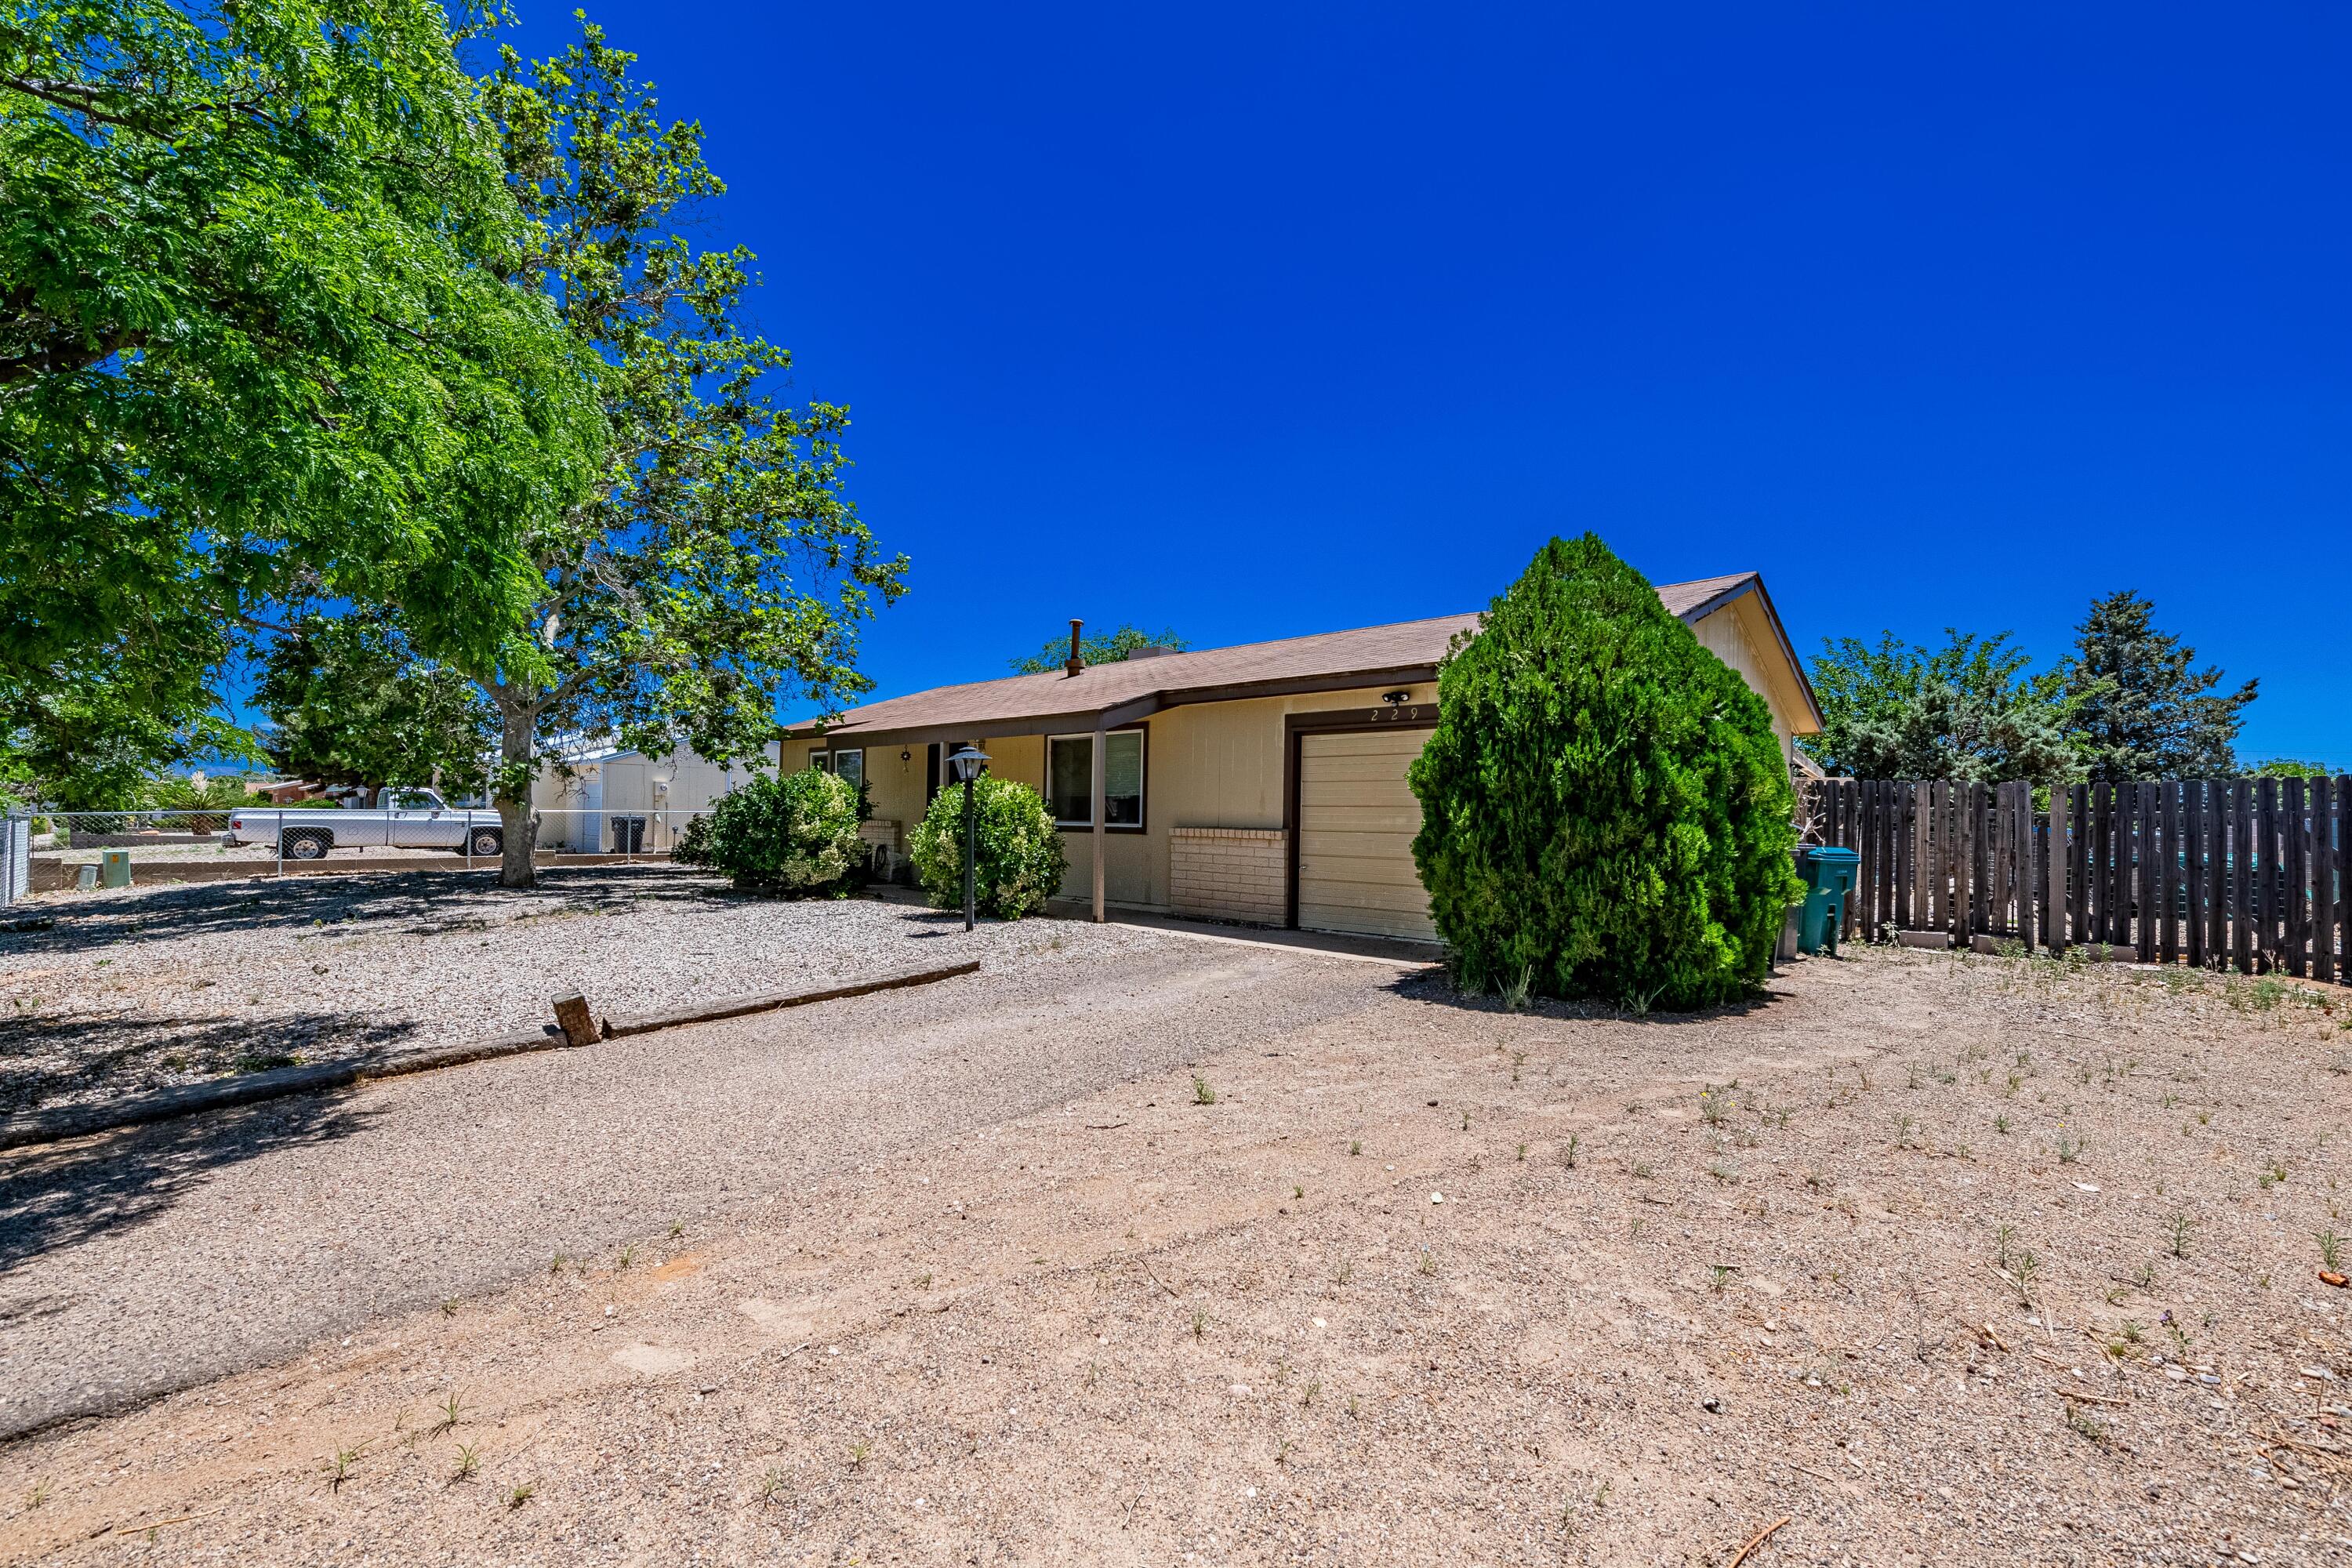 Don't miss out on this 2 bedroom cute house on a .20 acre lot that's in a great area with close access to Unser, shopping, movie theaters and more!